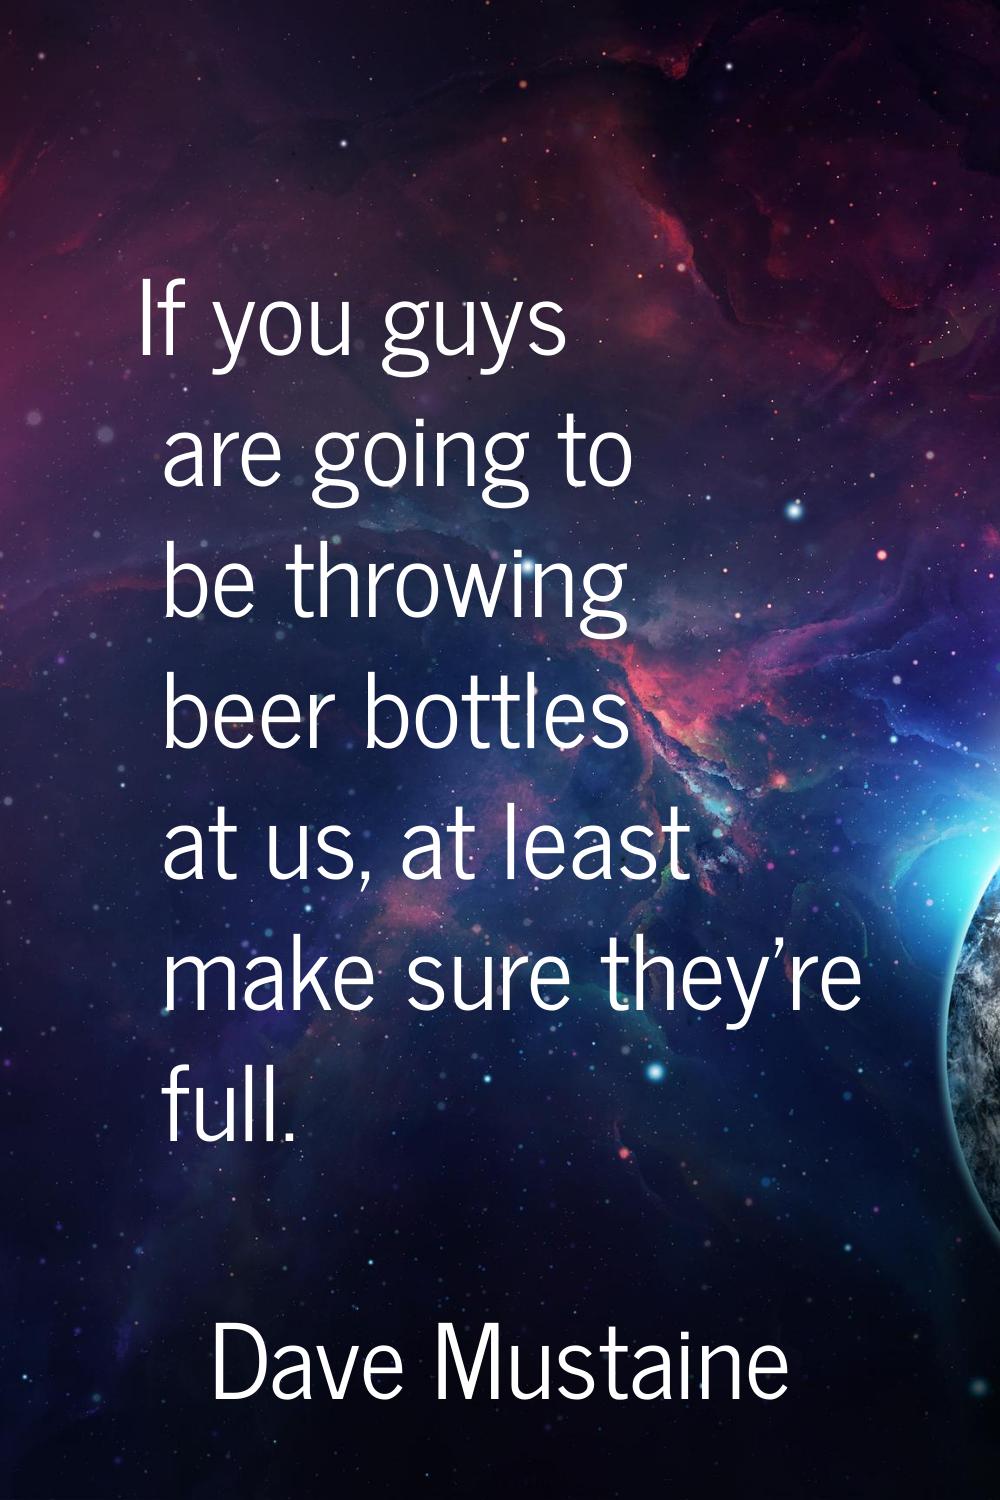 If you guys are going to be throwing beer bottles at us, at least make sure they're full.